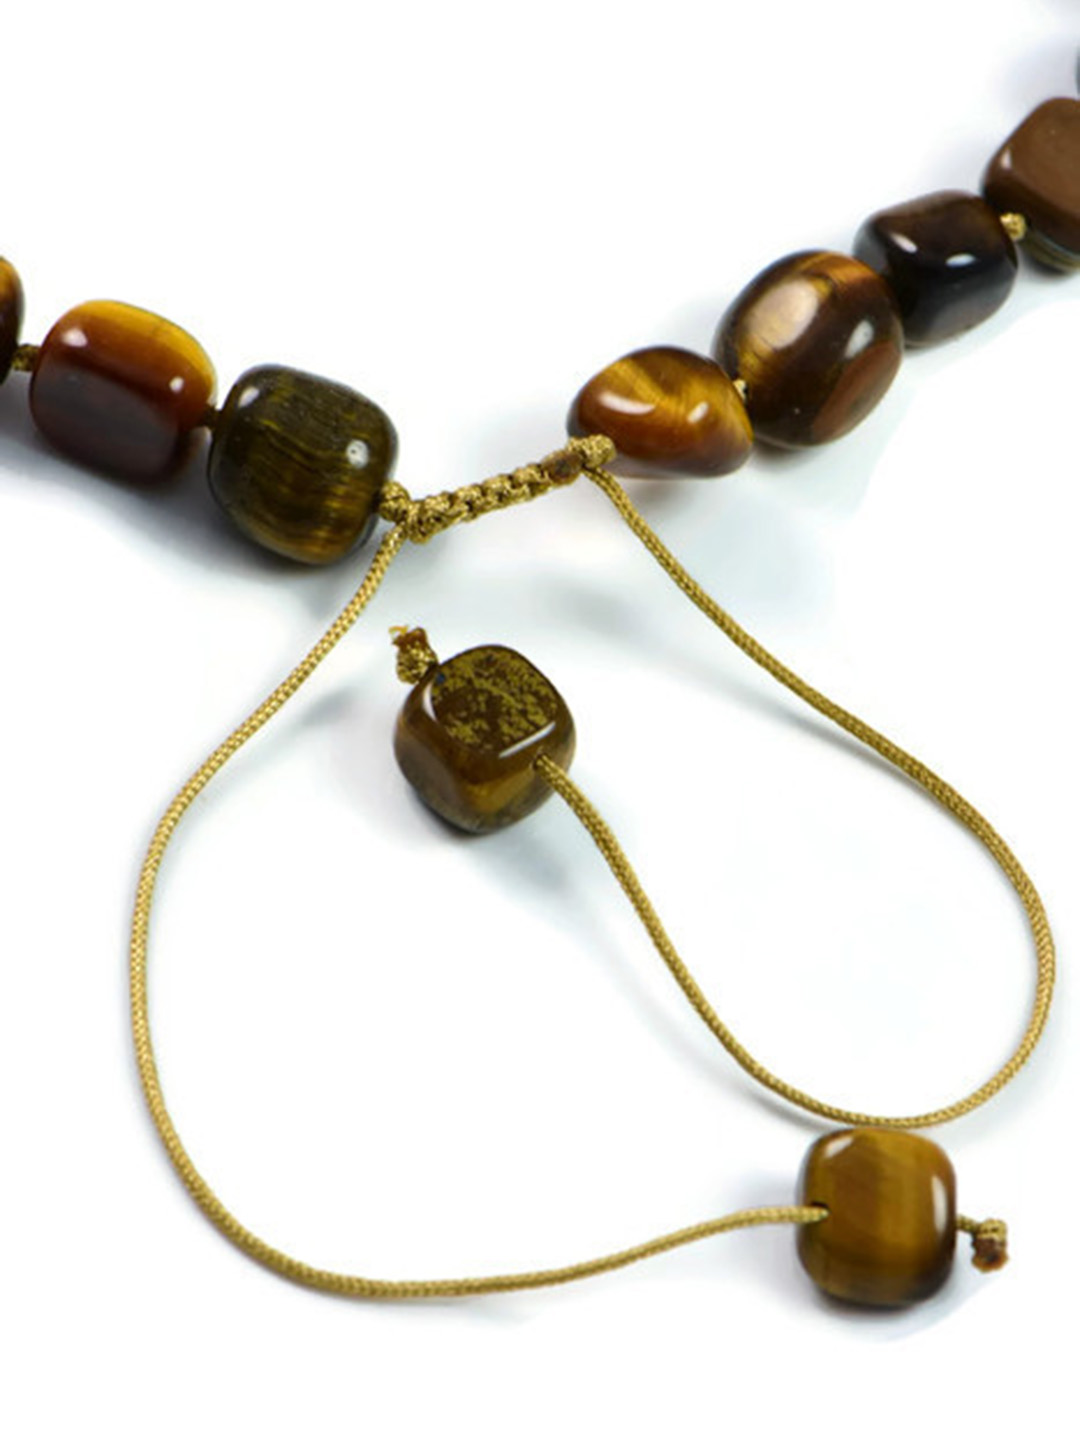 Tiger Eye Necklace 8mm Tiger's Eye Beads Hand Knotted Brown Tigers Eye Beads